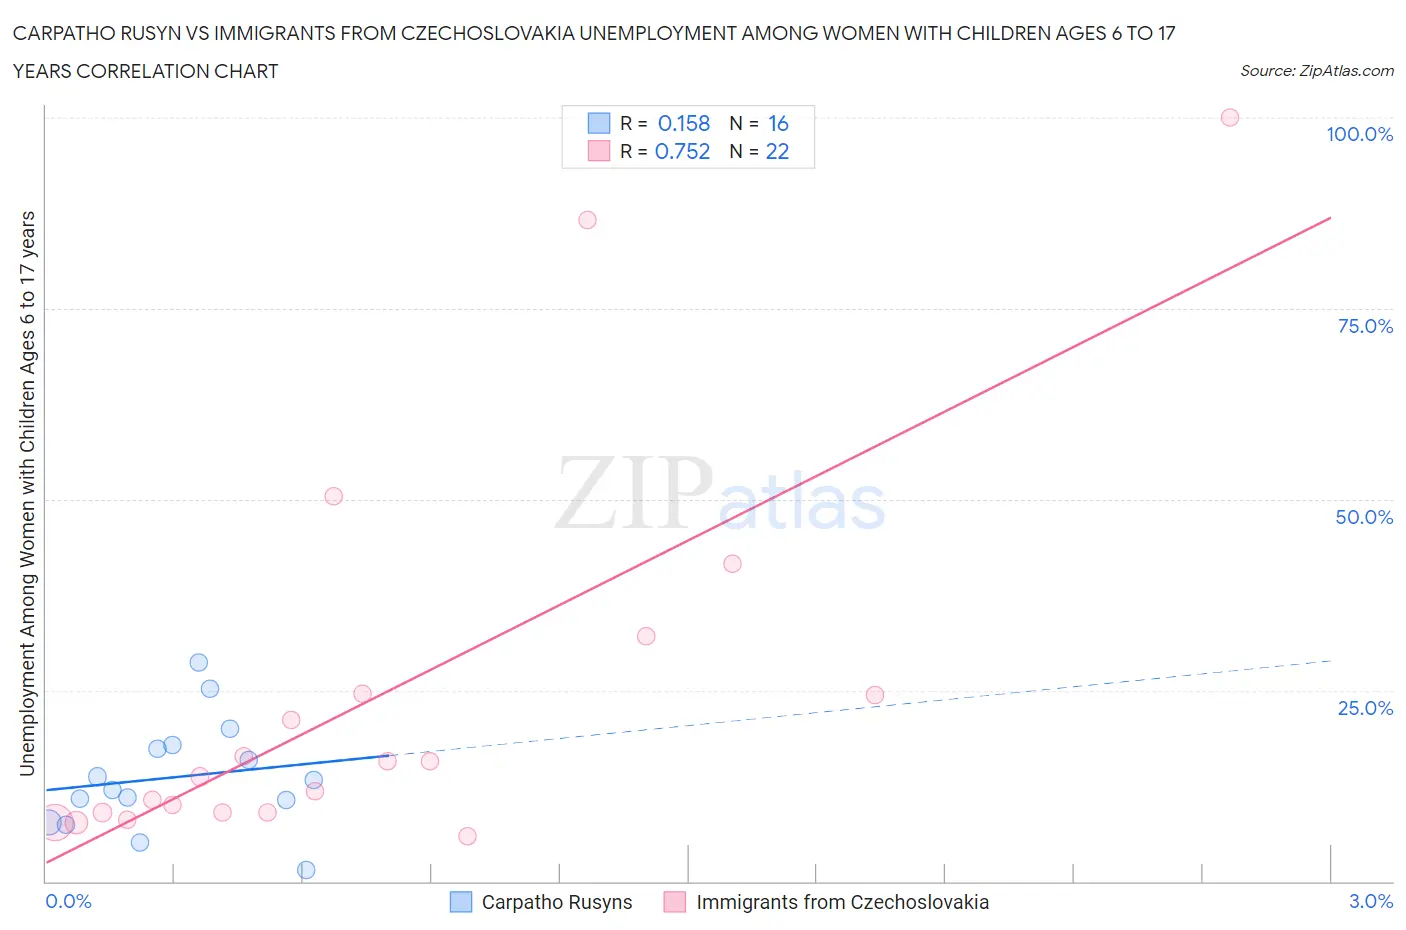 Carpatho Rusyn vs Immigrants from Czechoslovakia Unemployment Among Women with Children Ages 6 to 17 years